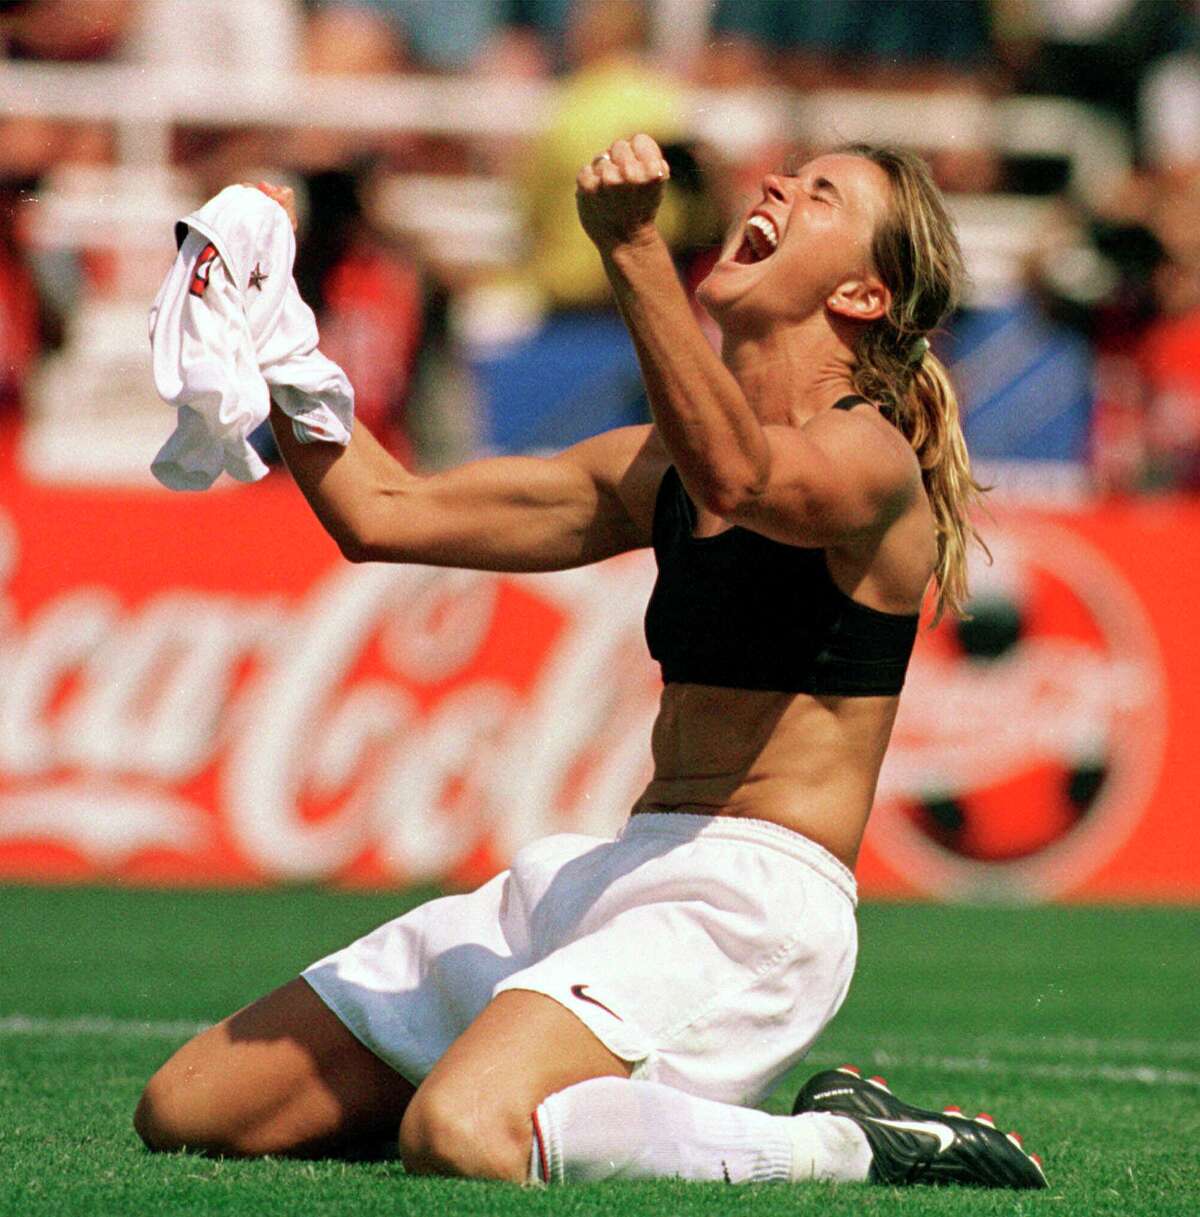 The previous record for attendance at a women’s soccer match was the 90,185 for the July 10, 1999 Women’s World Cup final between the United States and China at the Rose Bowl in Pasadena. The U.S. won after a 0-0 draw when Brandi Chastain made the game-winning penalty kick in the shootout.